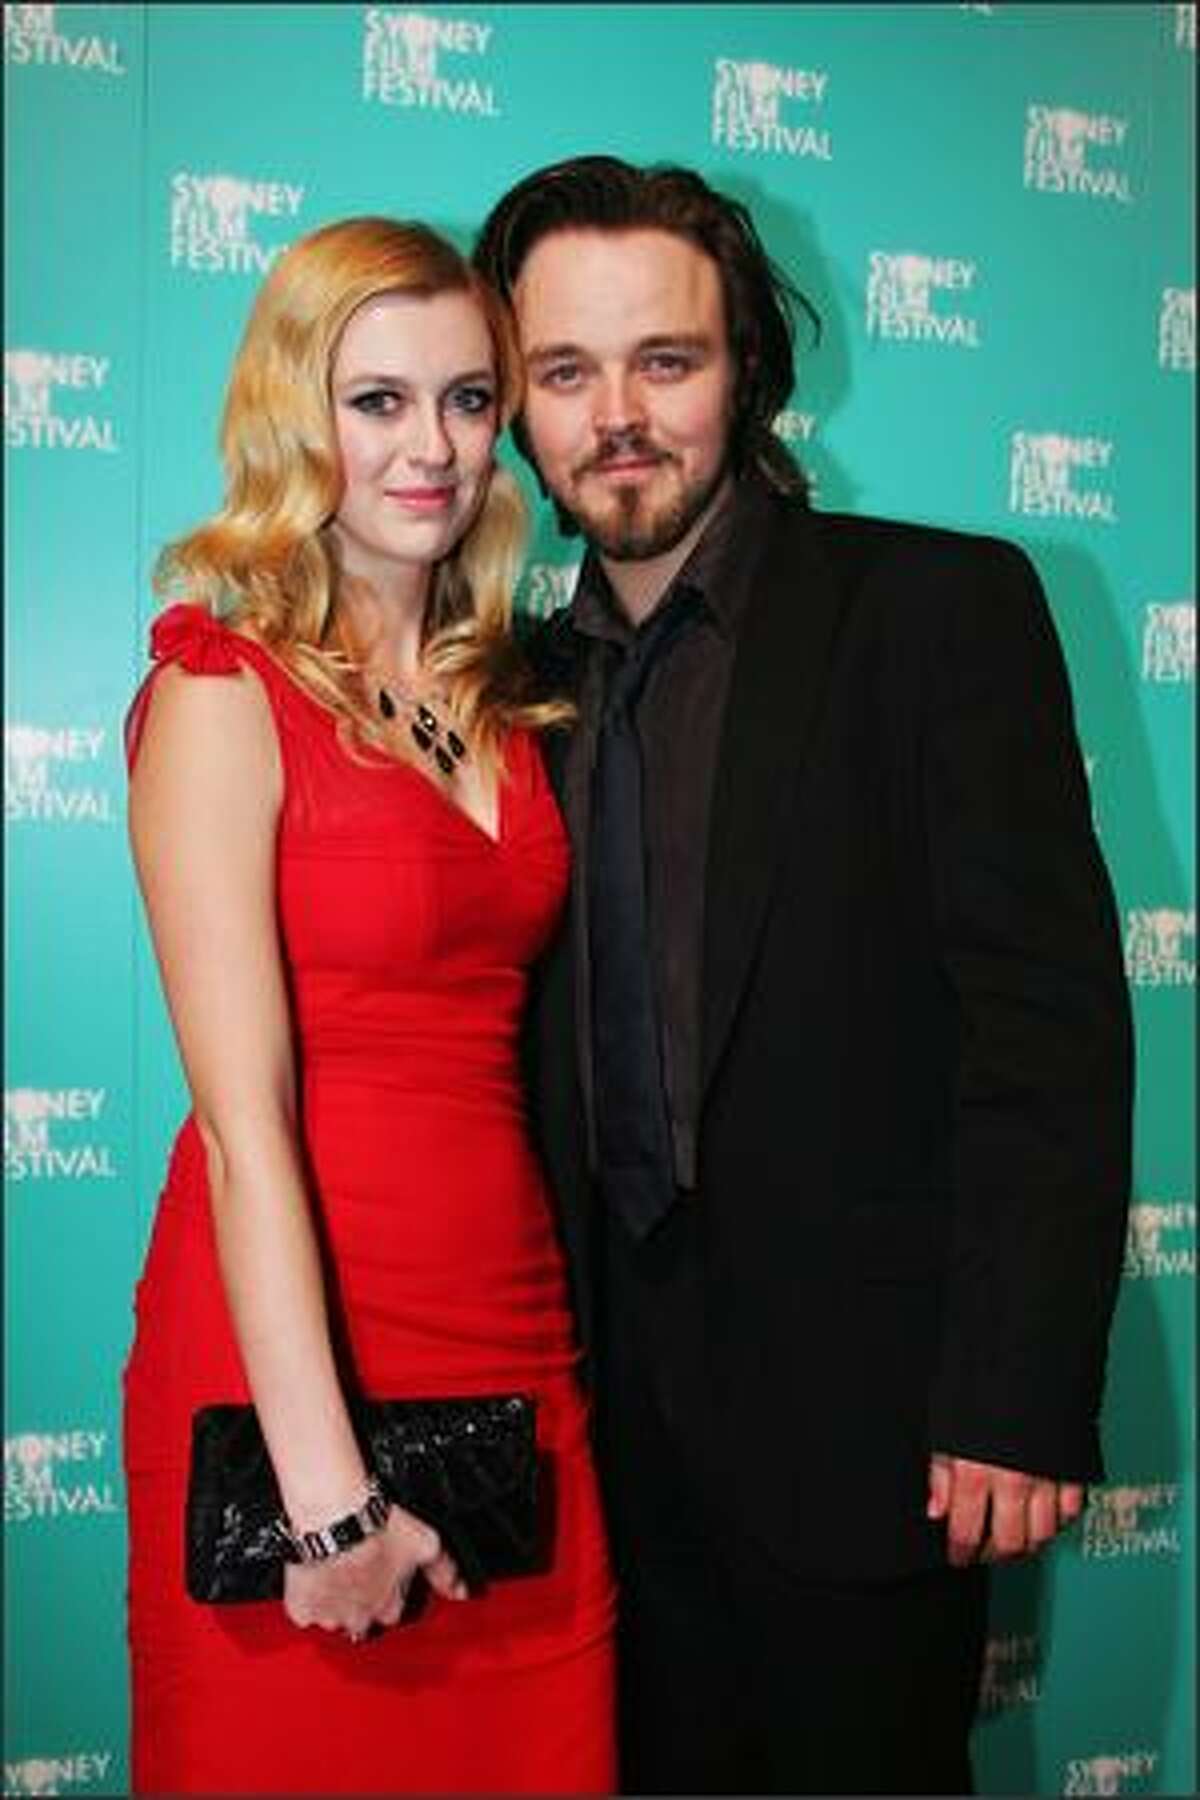 Gracie Otto and Matthew Newton attends the opening gala night and premiere of 'Happy-Go-Lucky' during the 55th Sydney Film Festival at the State Theatre on Wednesday in Sydney, Australia.